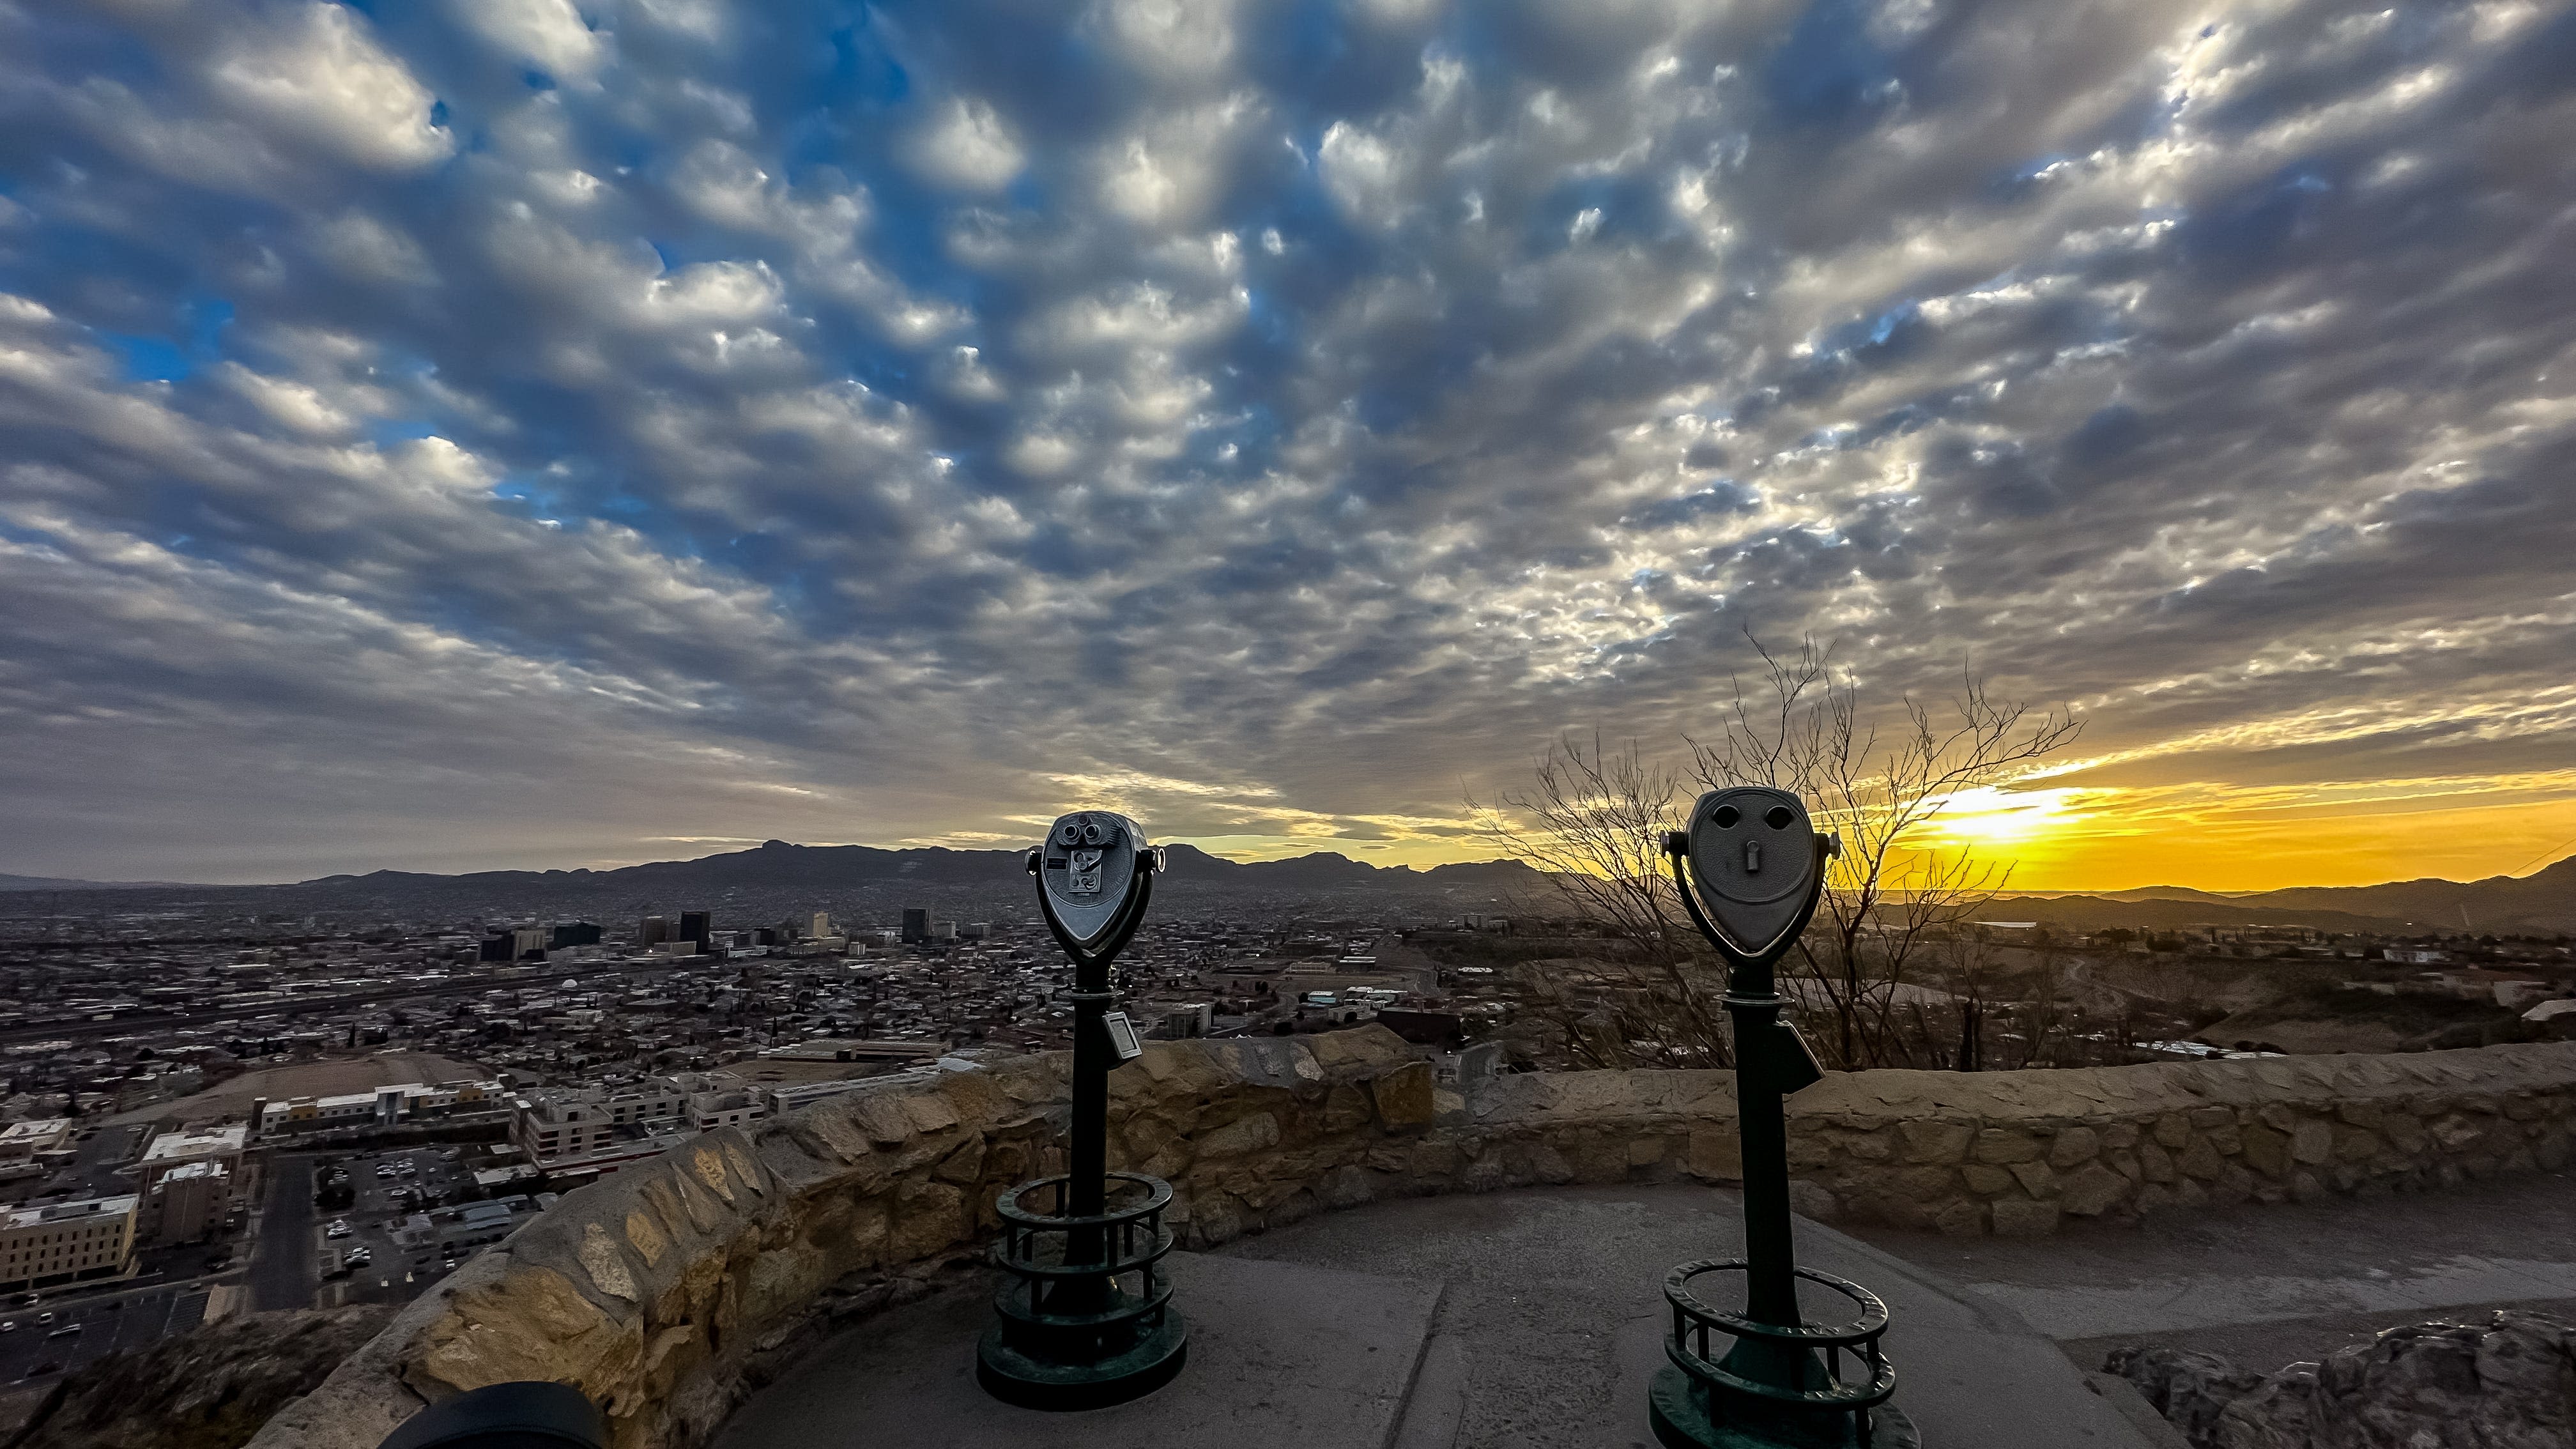 Where to catch El Paso’s breathtaking sunsets: Top scenic spots